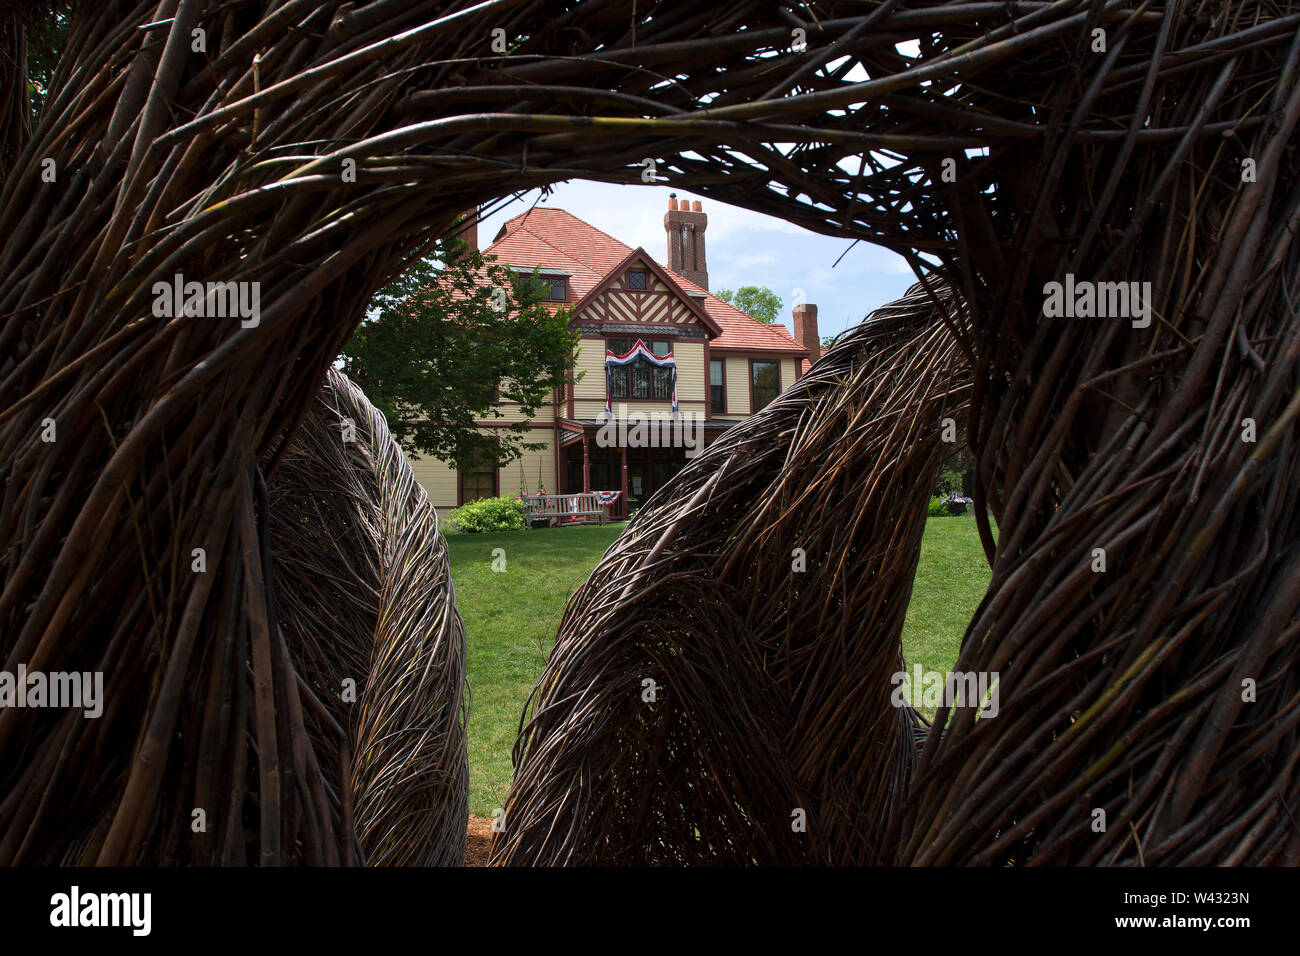 Highfield Hall, Falmouth, Massachusetts on Cape Cod. A Historic (1878) summer mansion. Photographed through 'Stickwork' by artist Patrick Dougherty. Stock Photo